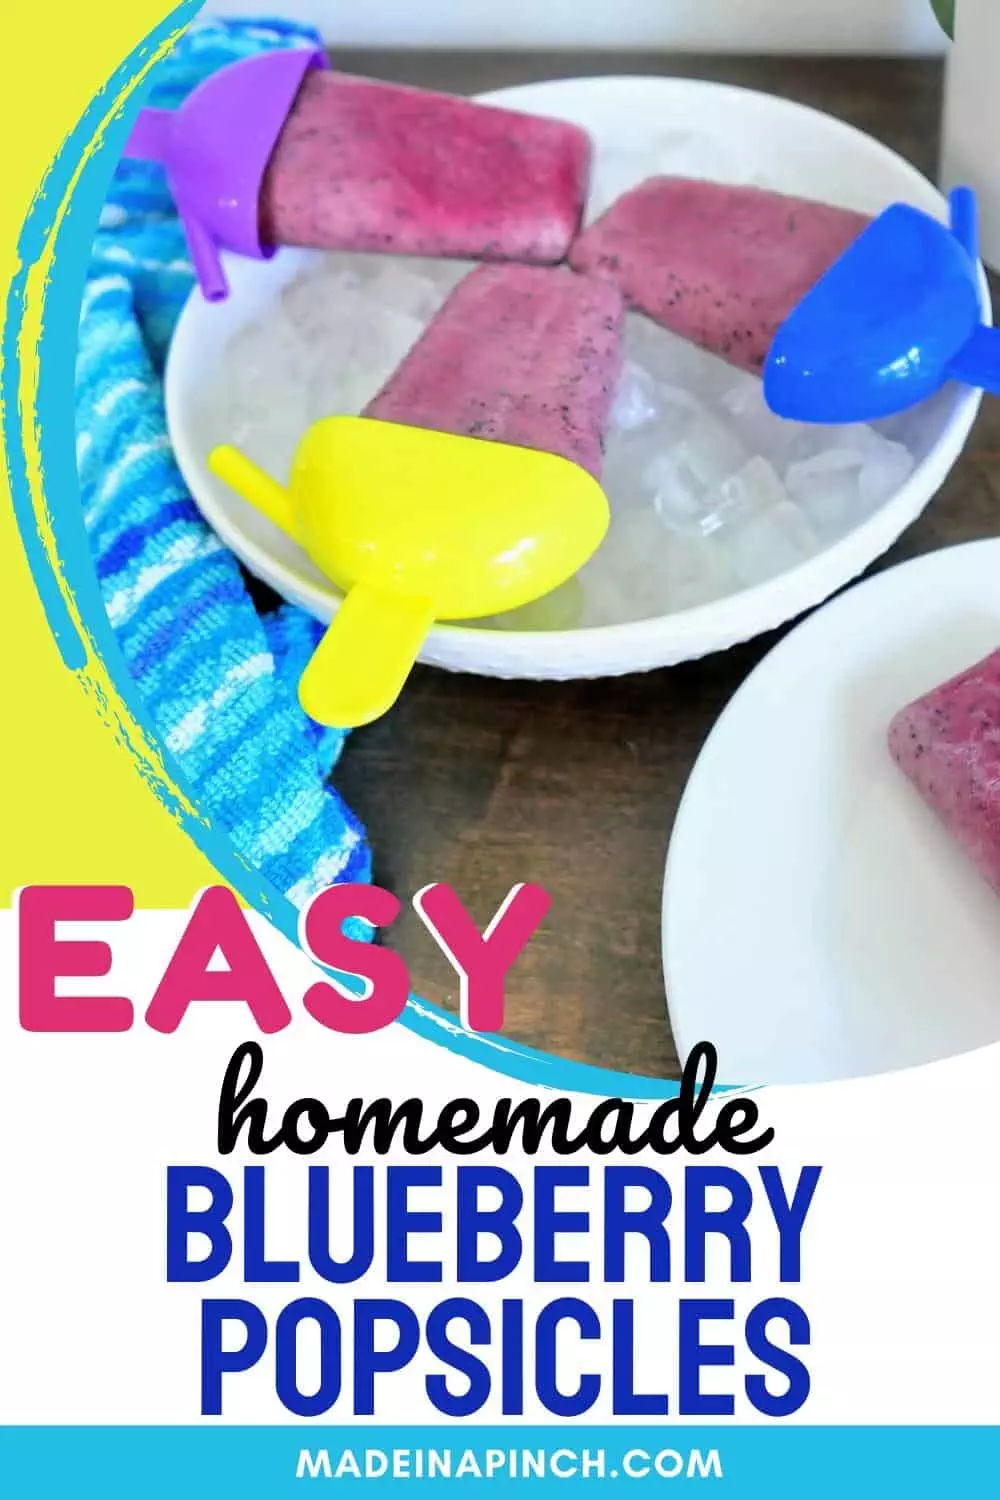 Blueberry popsicles pin image